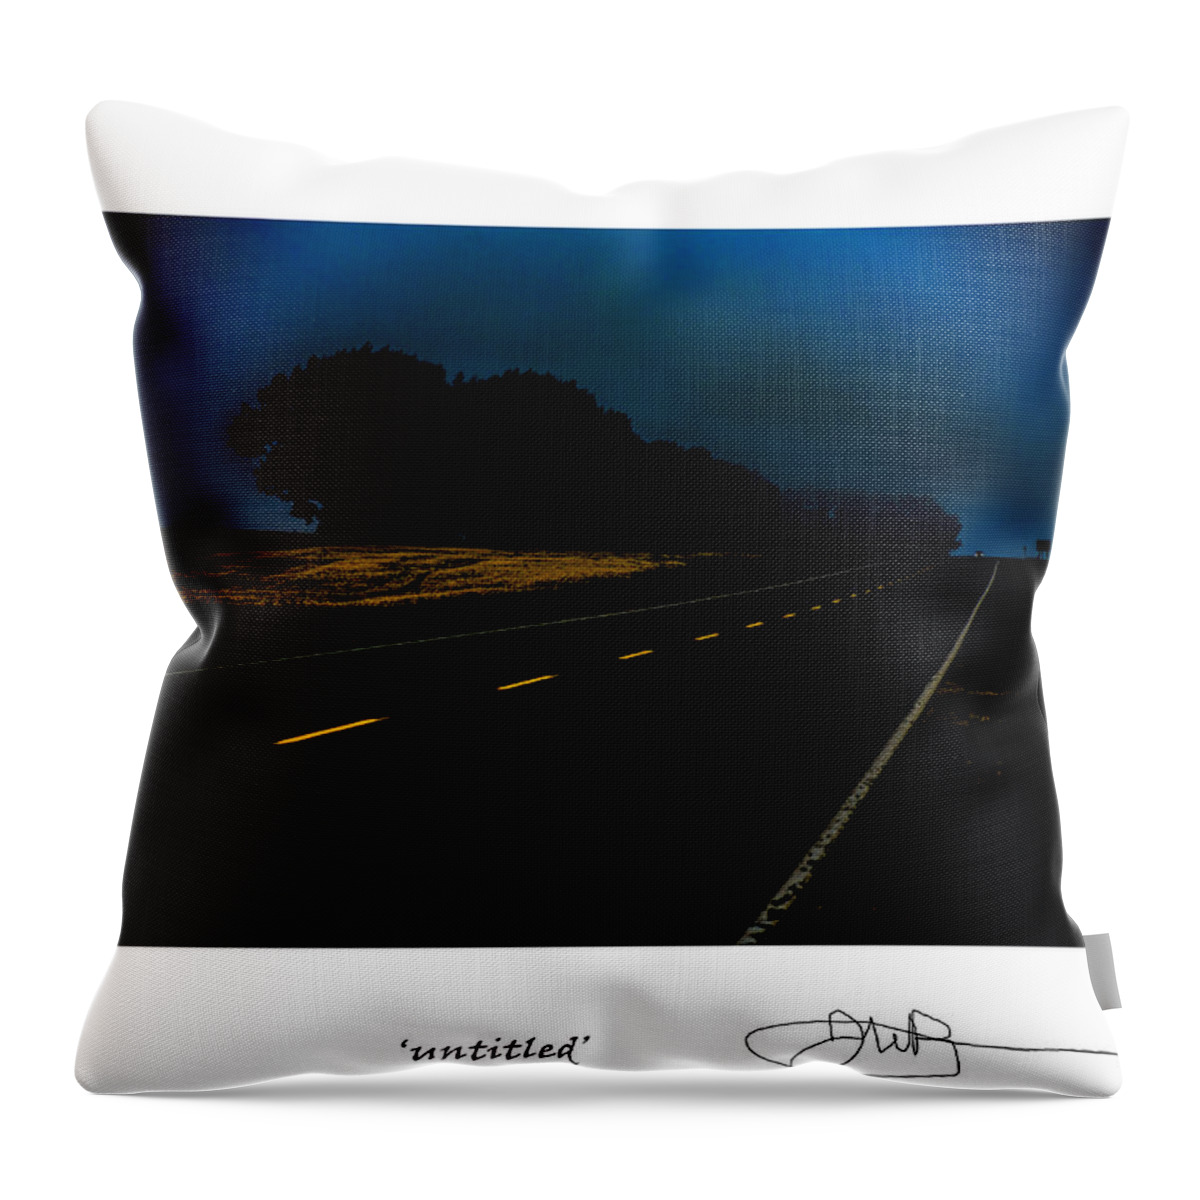 Signed Limited Edition Of 10 Throw Pillow featuring the digital art 22 by Jerald Blackstock